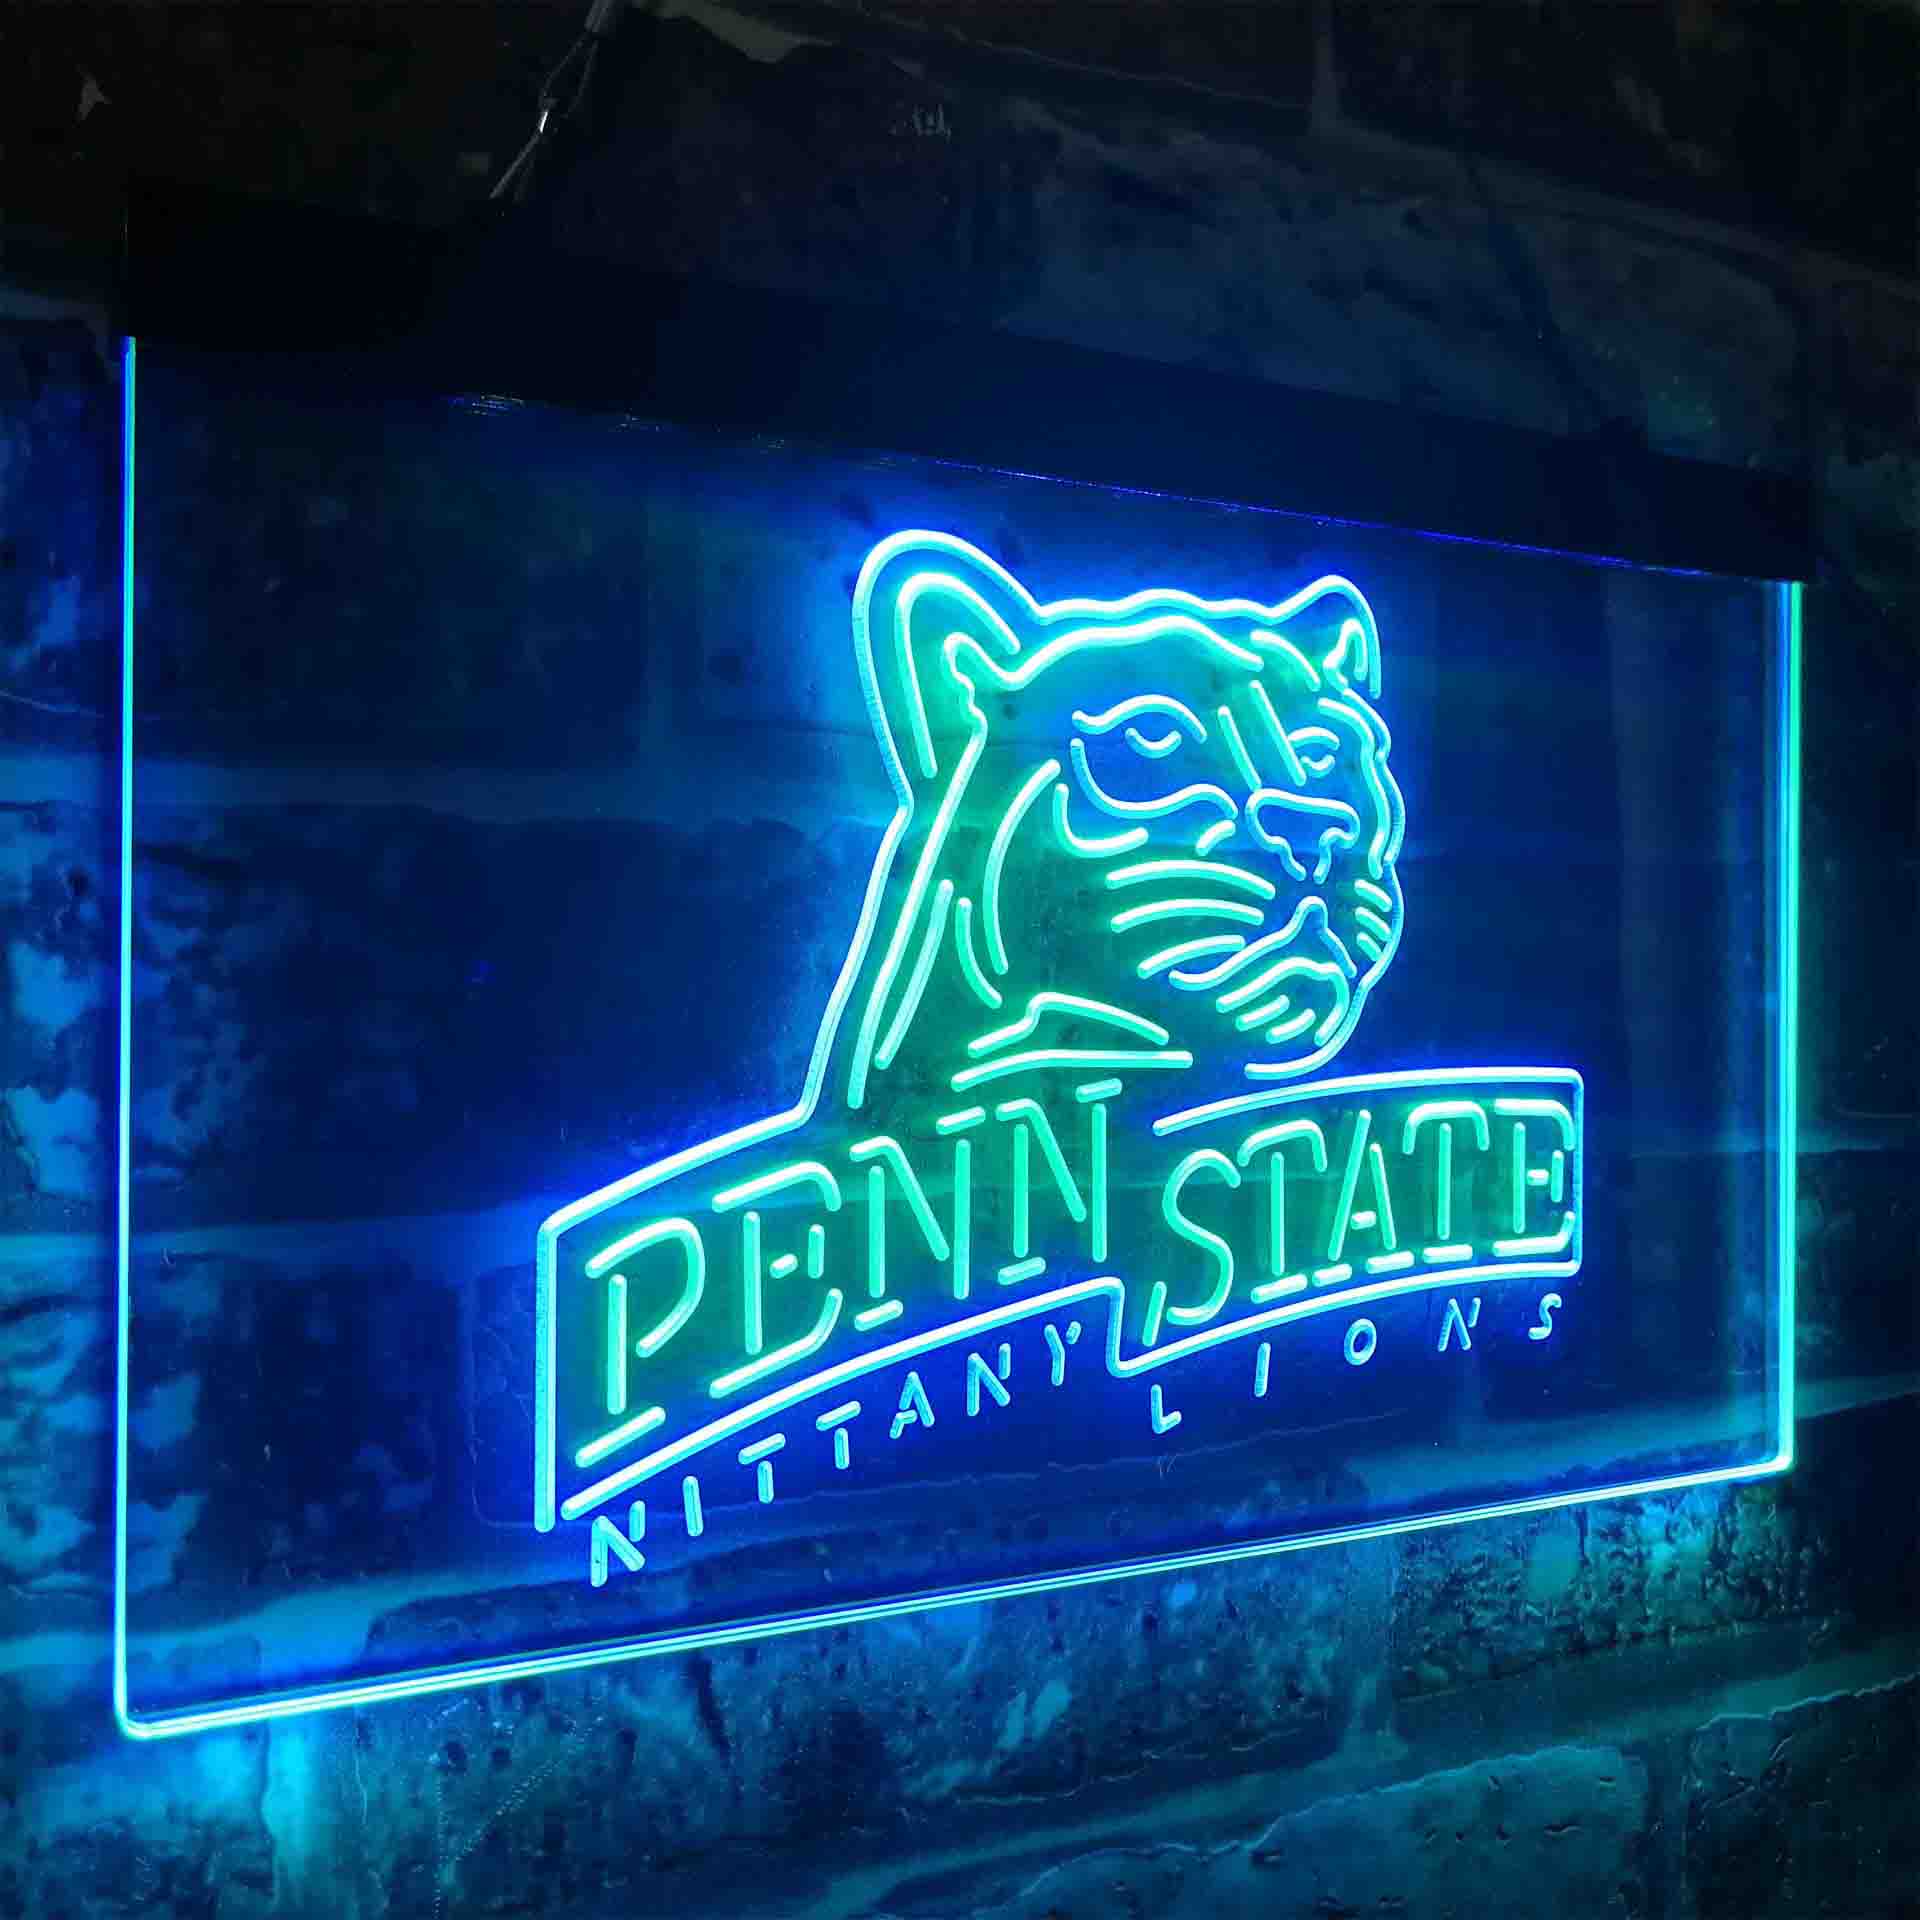 Penn State League Club Nittanys Mighty Liones LED Neon Sign